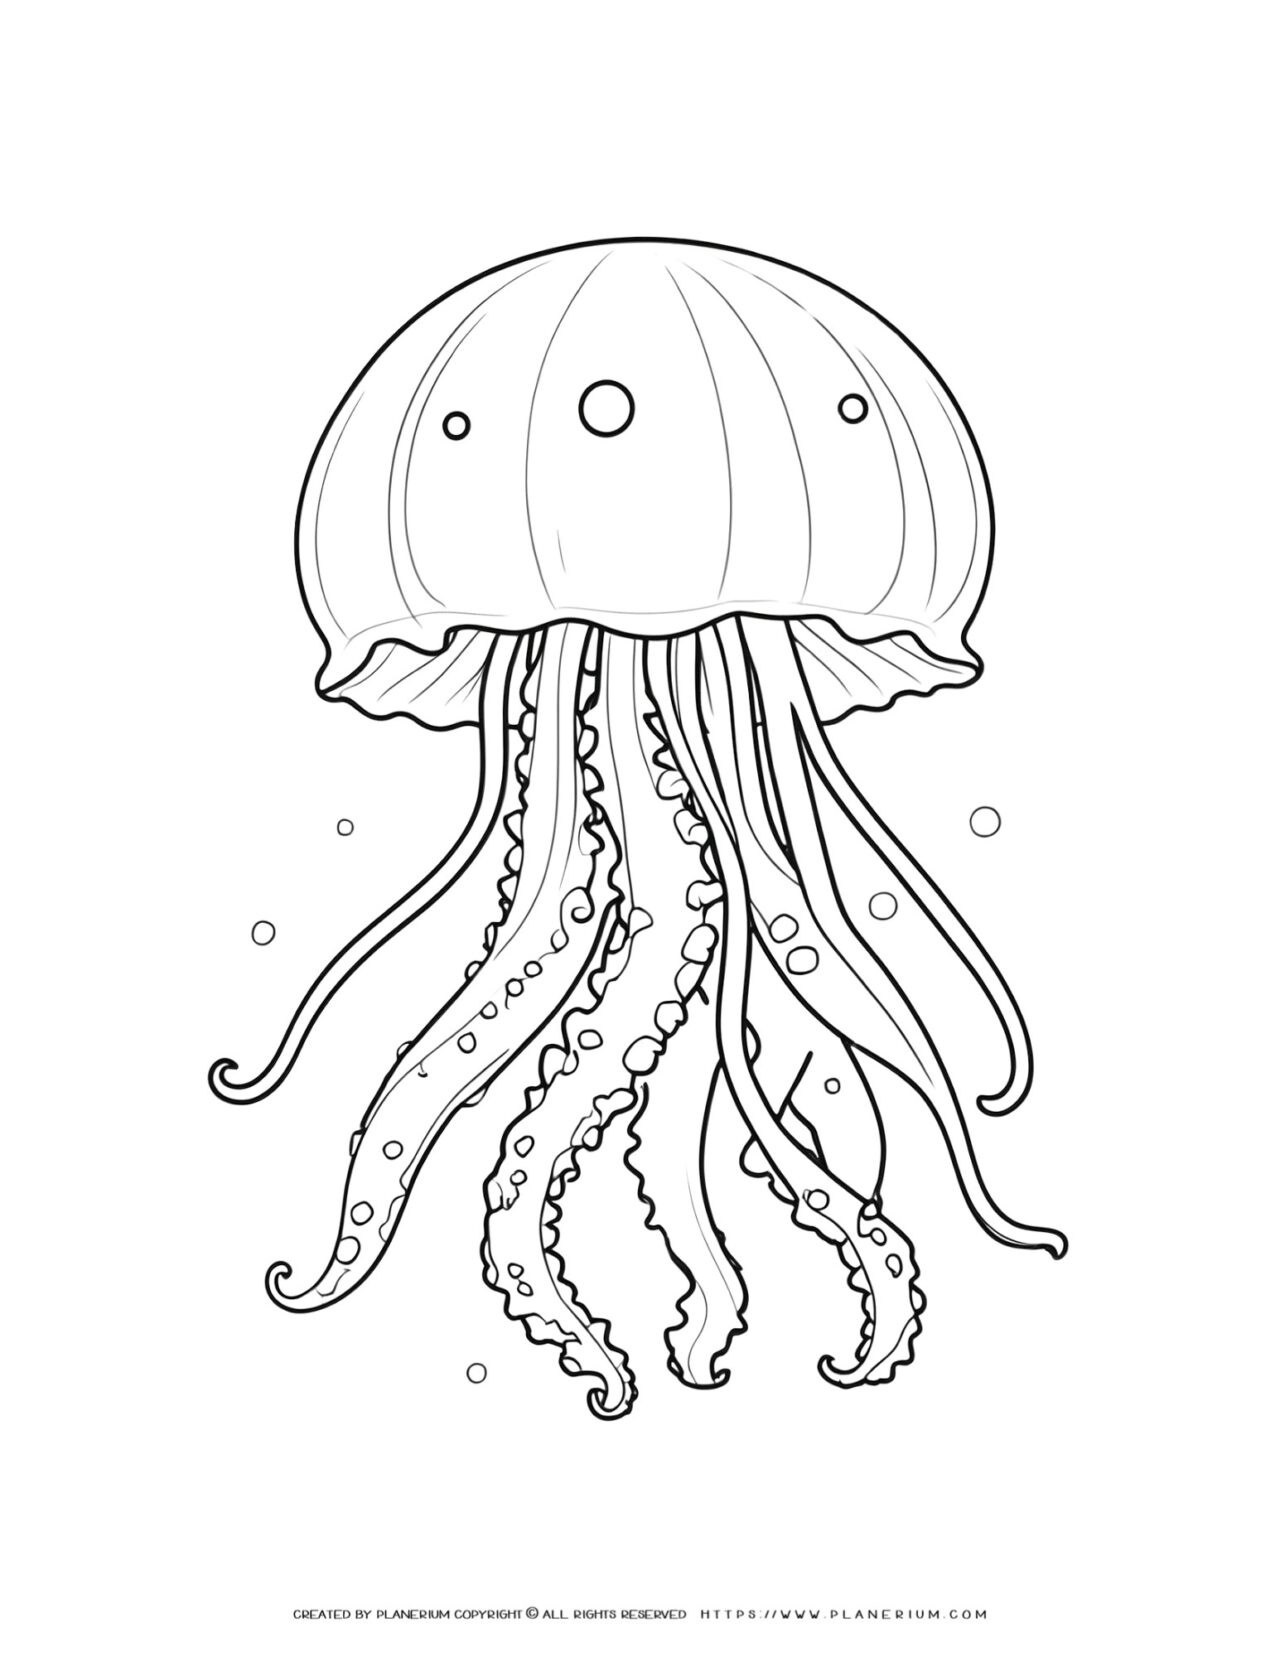 Jellyfish-coloring-page-illustration